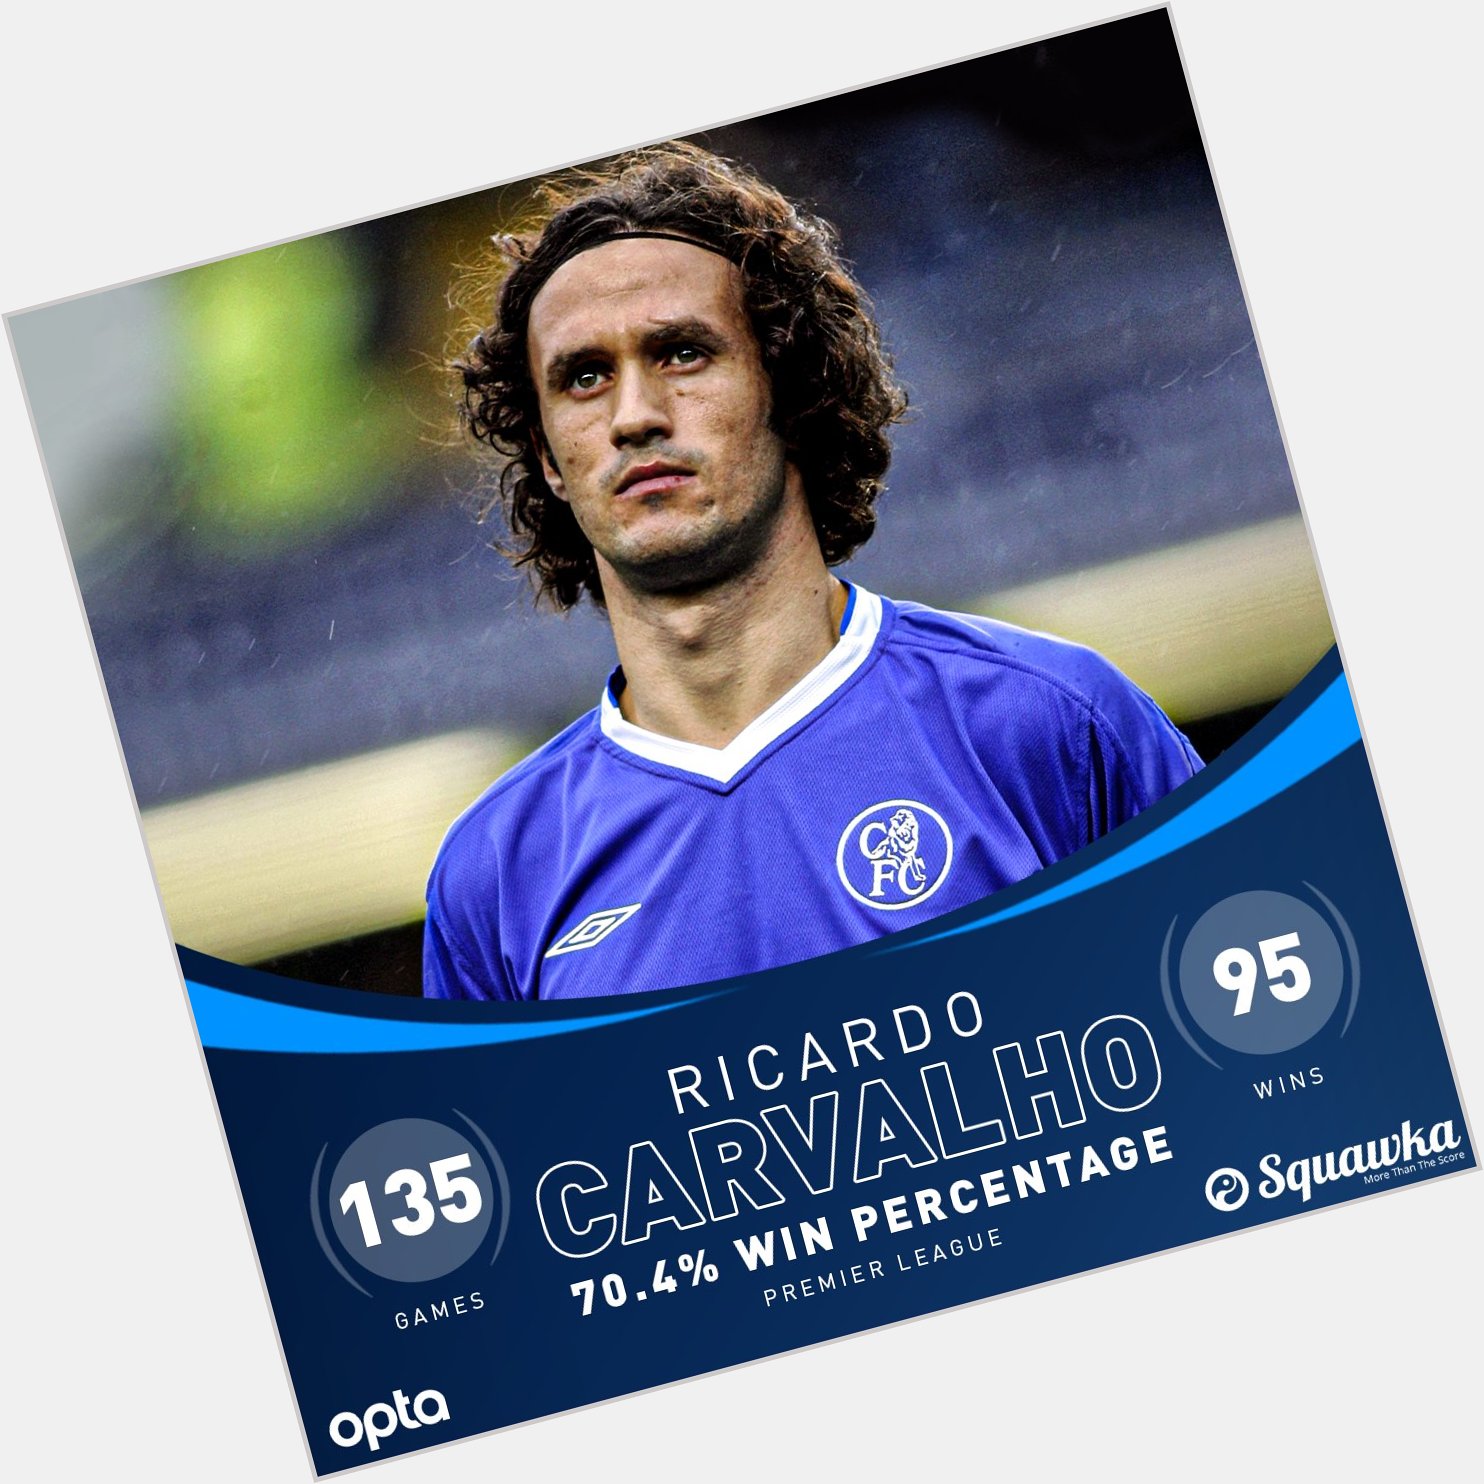 Happy Birthday to an absolute beast of an all round player, Ricardo Carvalho! 